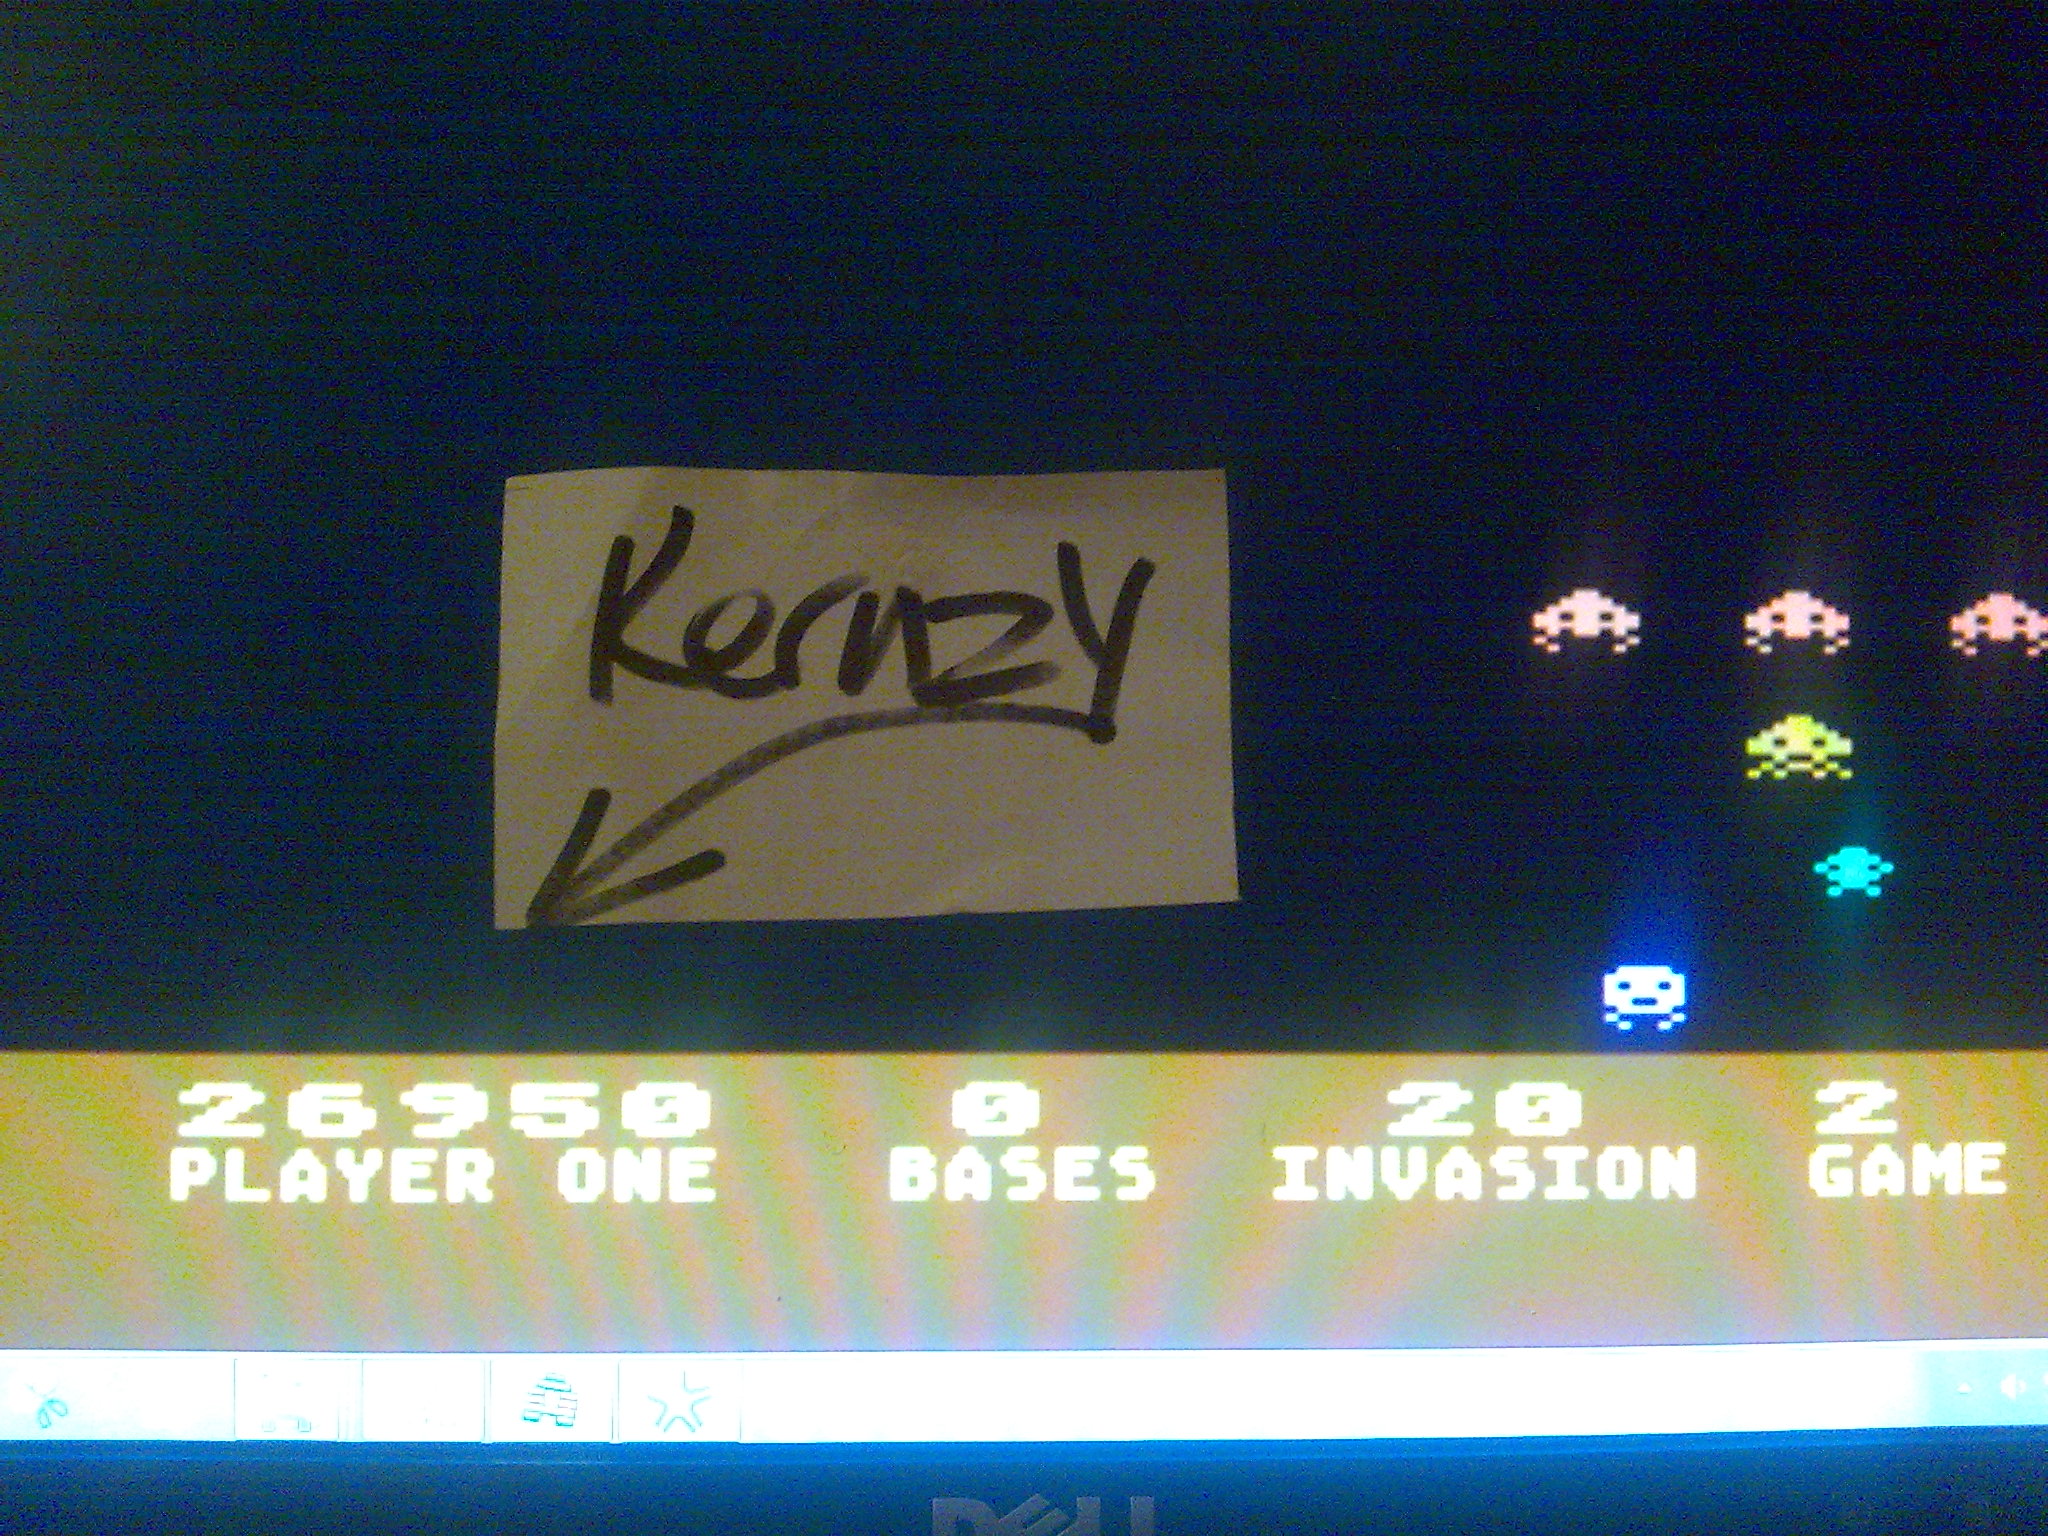 kernzy: Deluxe Invaders: Game 2 (Atari 400/800/XL/XE Emulated) 26,950 points on 2014-10-21 22:47:18